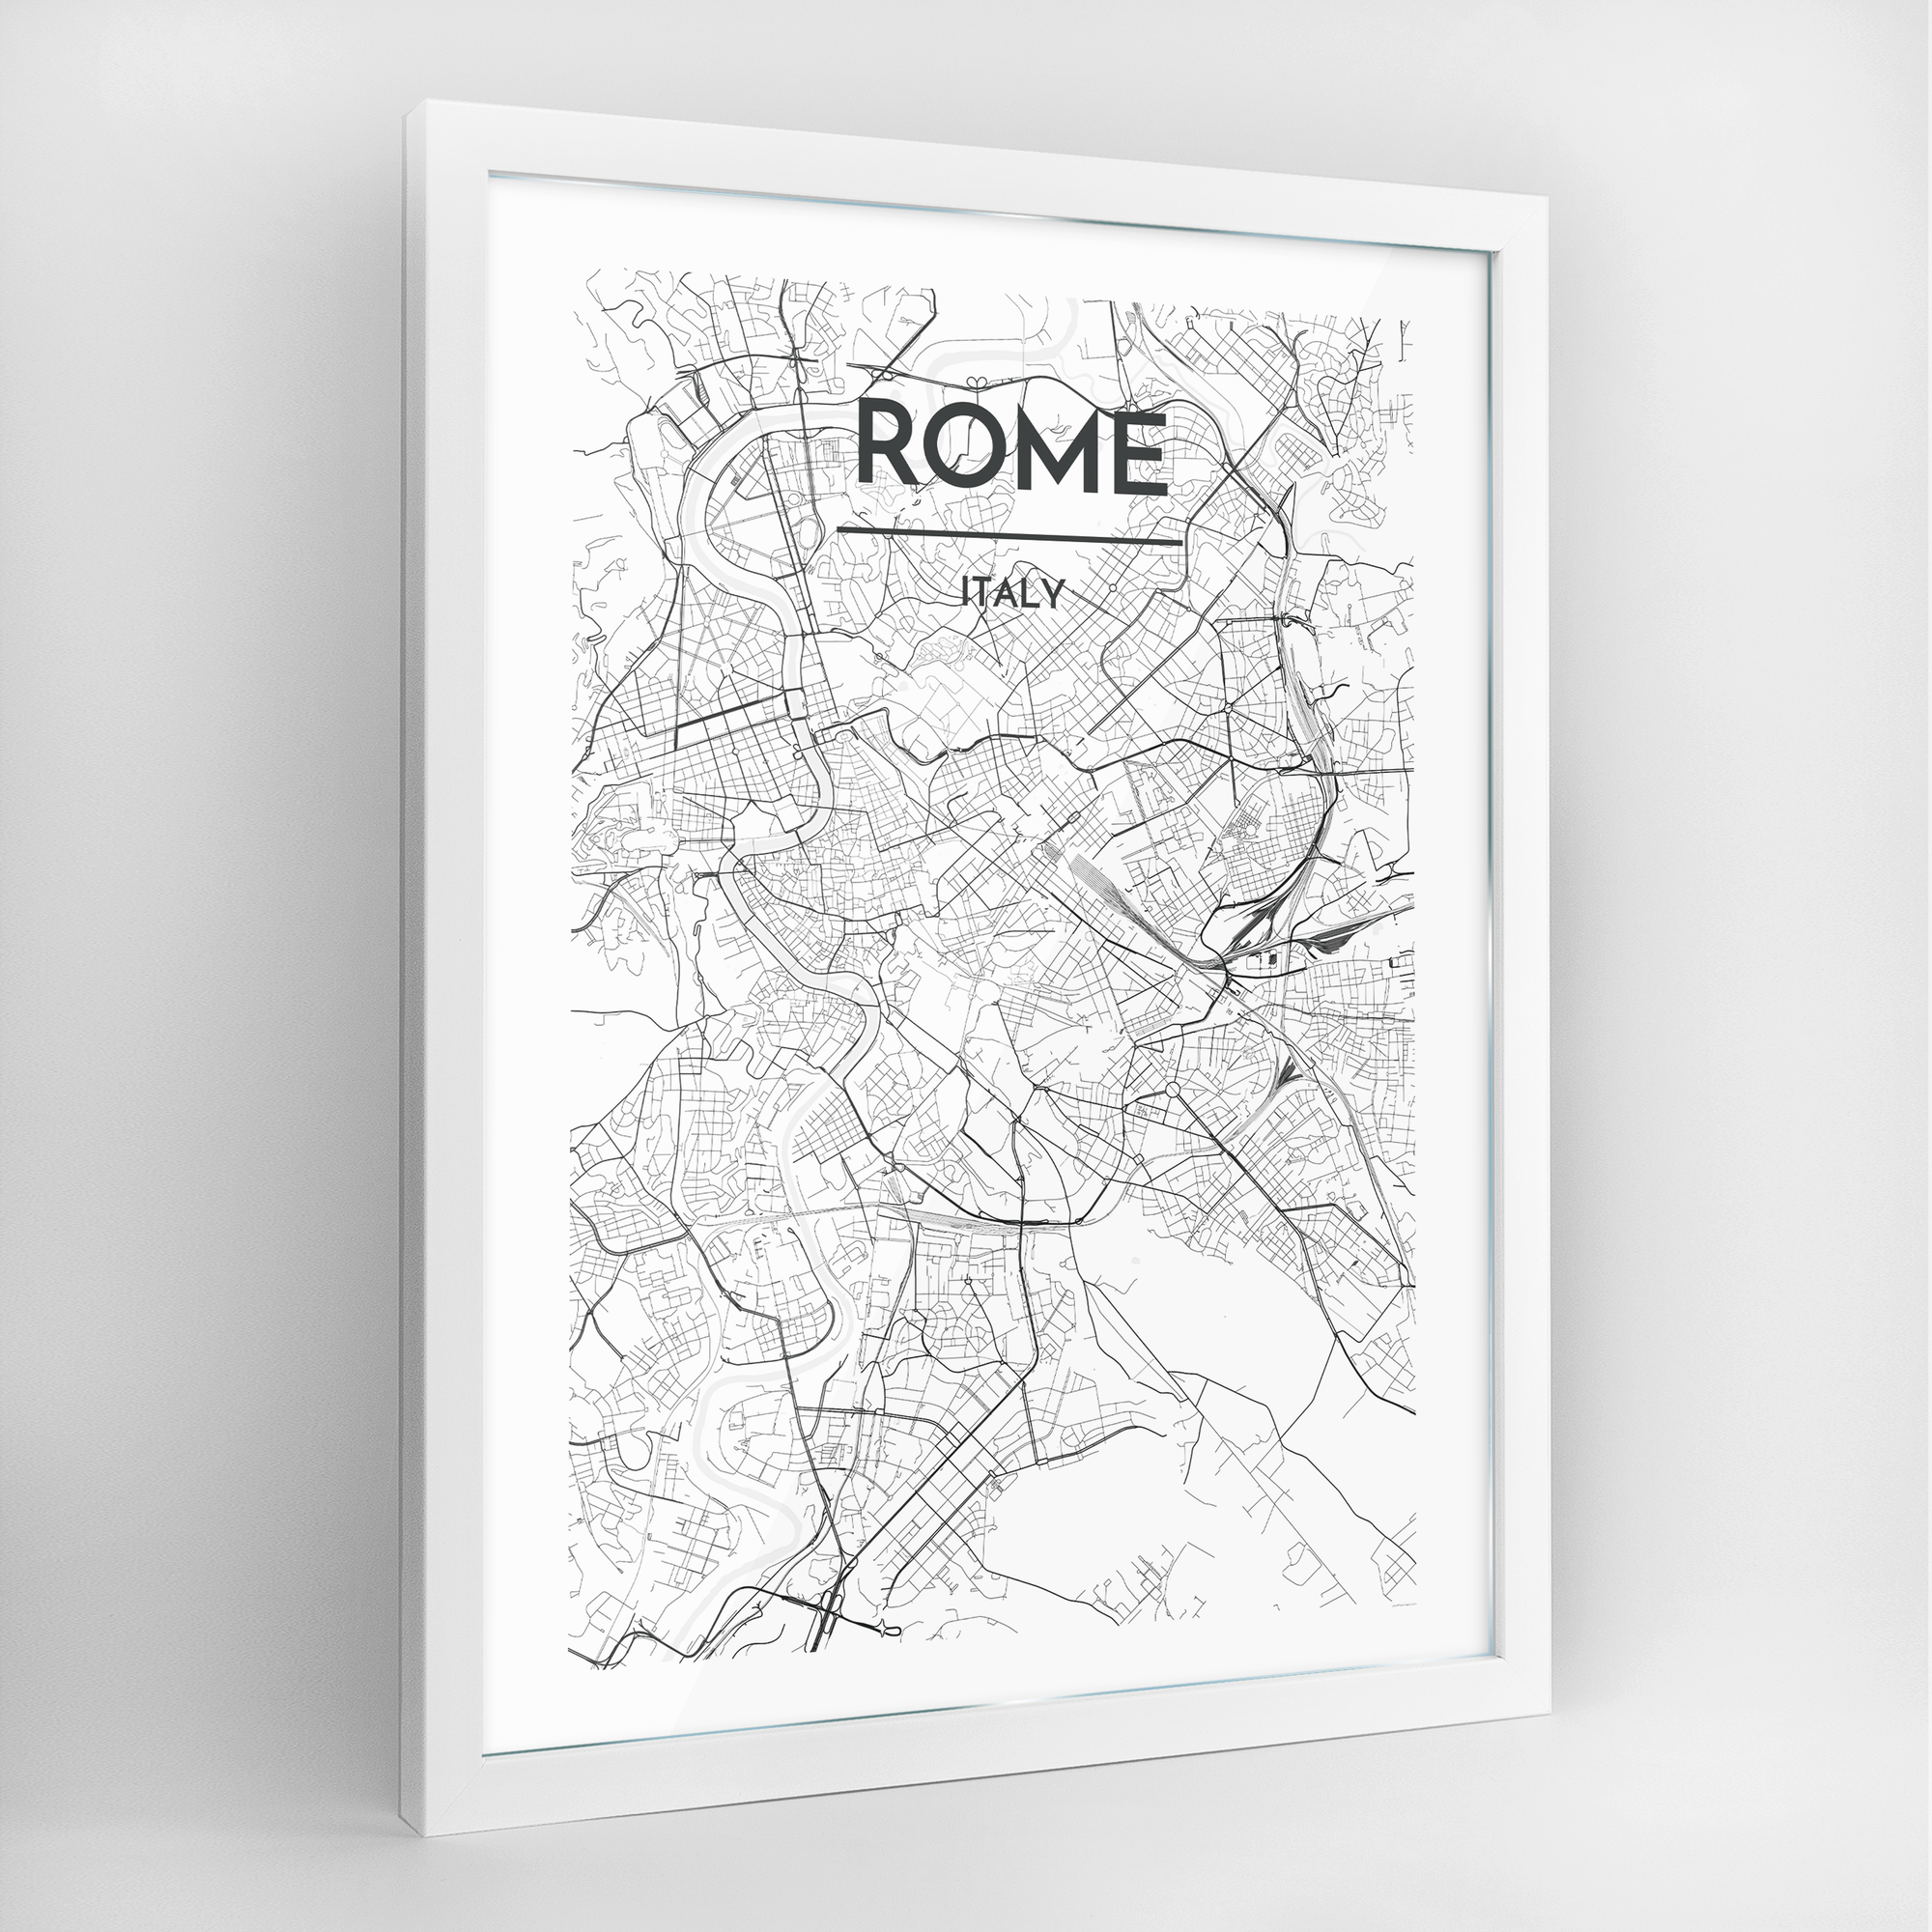 Rome City Map City Map Framed Art Solid Wood Framed Built In Canada Point Two Design